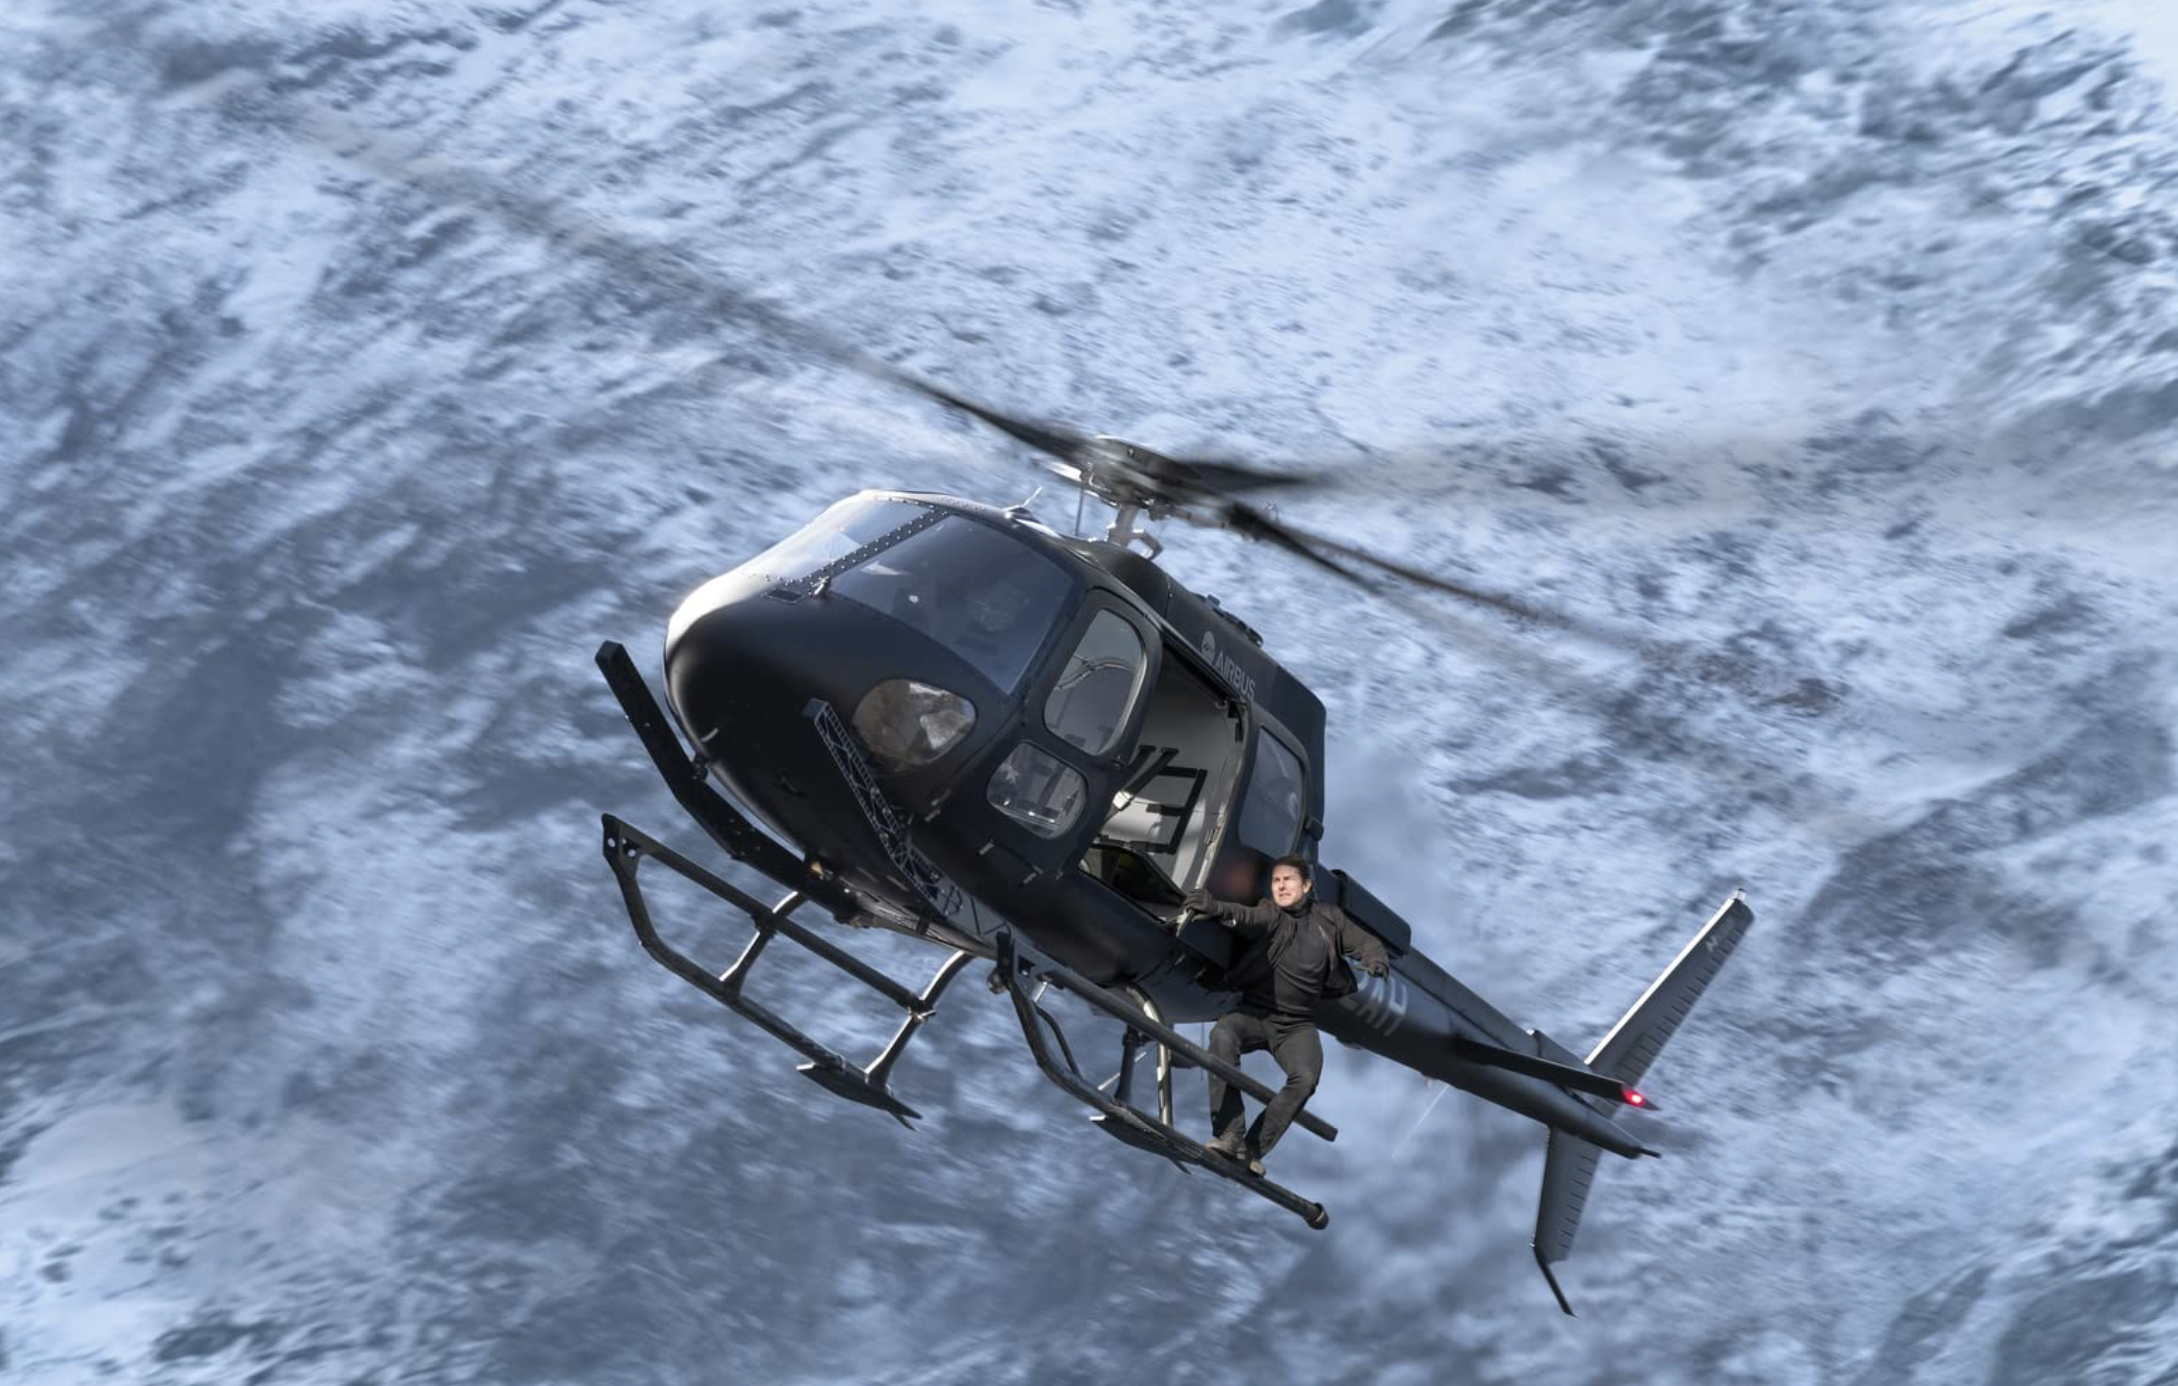 <p>In the sixth instalement of “Mission Imposible,” Tom Cruise flew a helicopter, rode a motorcycle through the city streets—without a helmet—as it crashed into a car and jumped between buildings. Of course he did all the stunts himself, and miracously he got away only with an ankle injury. The stunt which was <a href="https://www.youtube.com/watch?v=T2wVthnaPJg">caputured on footage</a>  went wrong when Cruise hit a roof instead of sticking a landing. While production ultimately halted because of Cruise’s injury, the actor complete the scene even with a shattered leg. </p><p>"I knew instantly my ankle was broken and I really didn’t want to do it again so just got up and carried on with the take," Cruise revelead on <a href="https://www.youtube.com/watch?v=iNT-tPrz4OM">The Graham Norton Show</a>.</p>